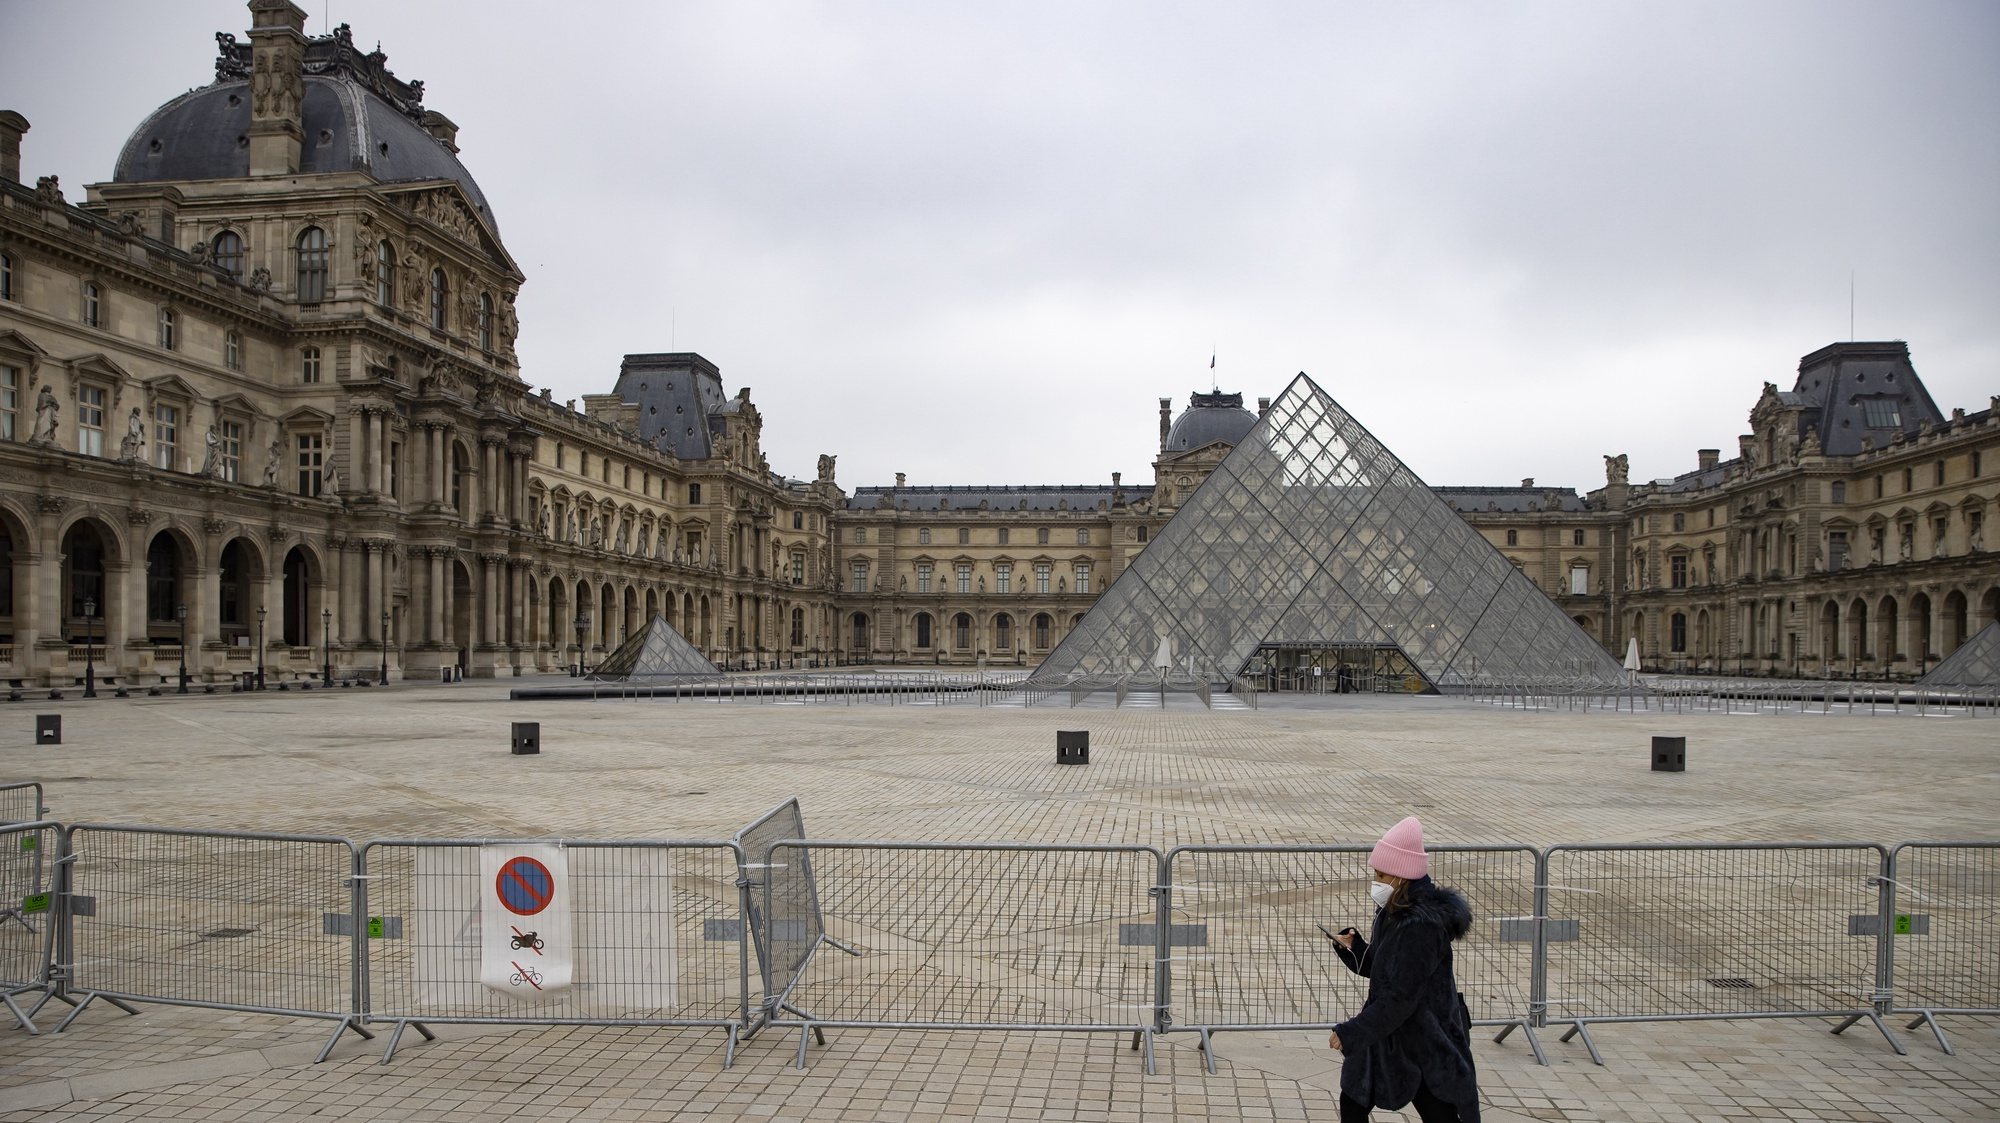 epa08924851 Metal barriers block the access to the pyramids of the Louvre museum in Paris, France, 07 January 2021. Cultural sites including museums, cinemas and theatres were originally due to reopen on 07 January 2021 after shutting on 28 October 2020 as part of the second lockdown, but the government decided to put the reopening plans on hold due to the surge in covid-19 cases.  EPA/IAN LANGSDON